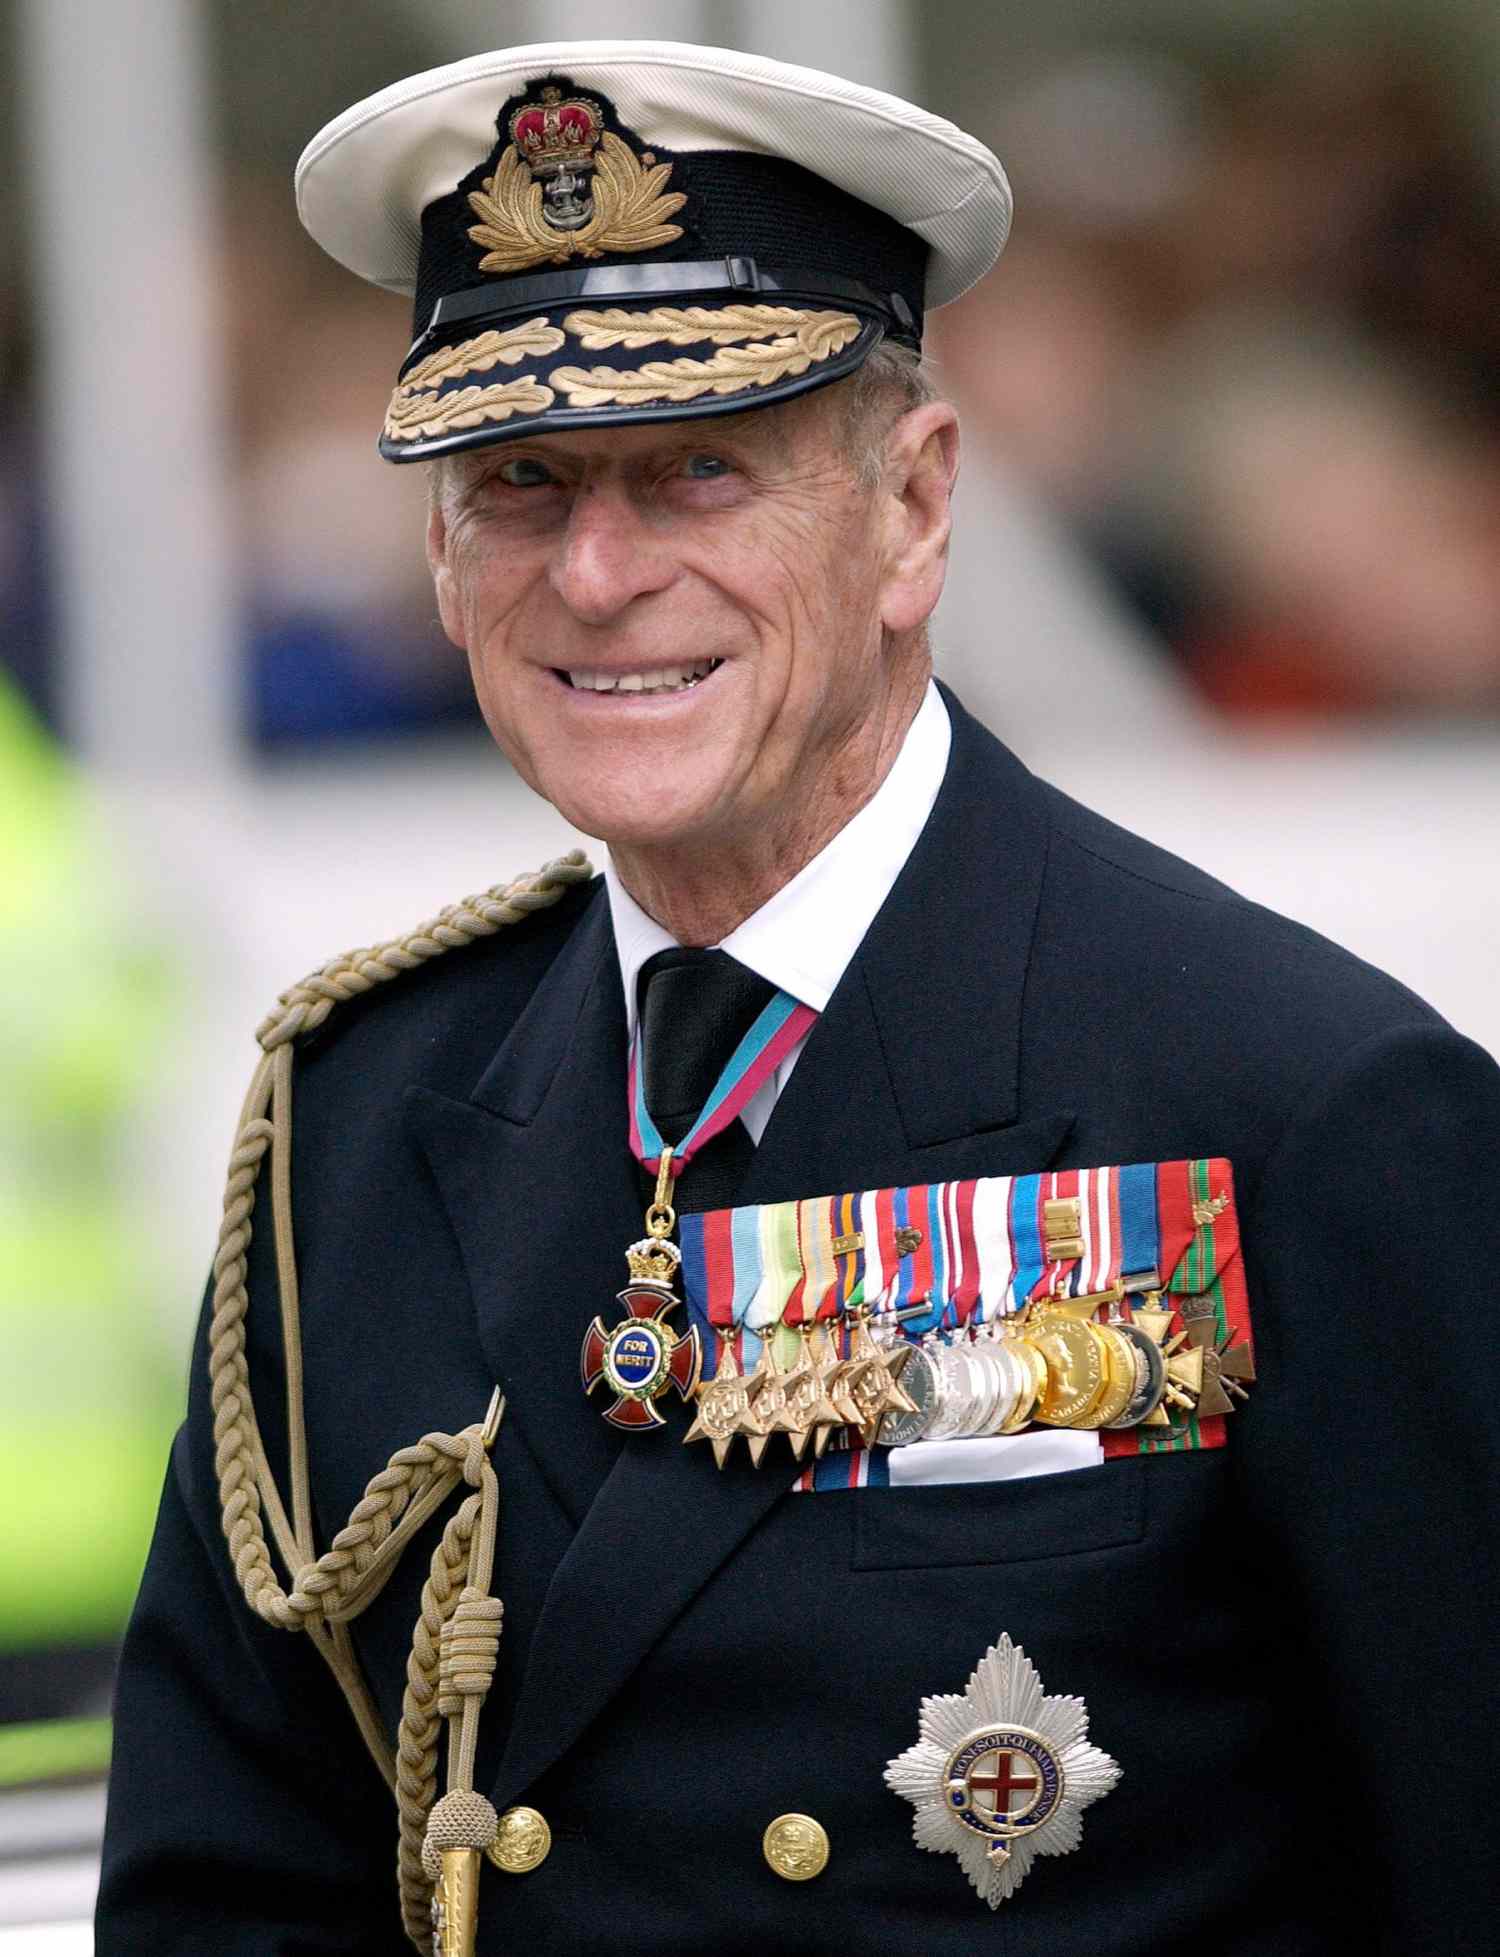 Prince Philip In Military Uniform As Admiral Of The Fleet In The Royal Navy For A Service Of Remembrance For The Iraq War